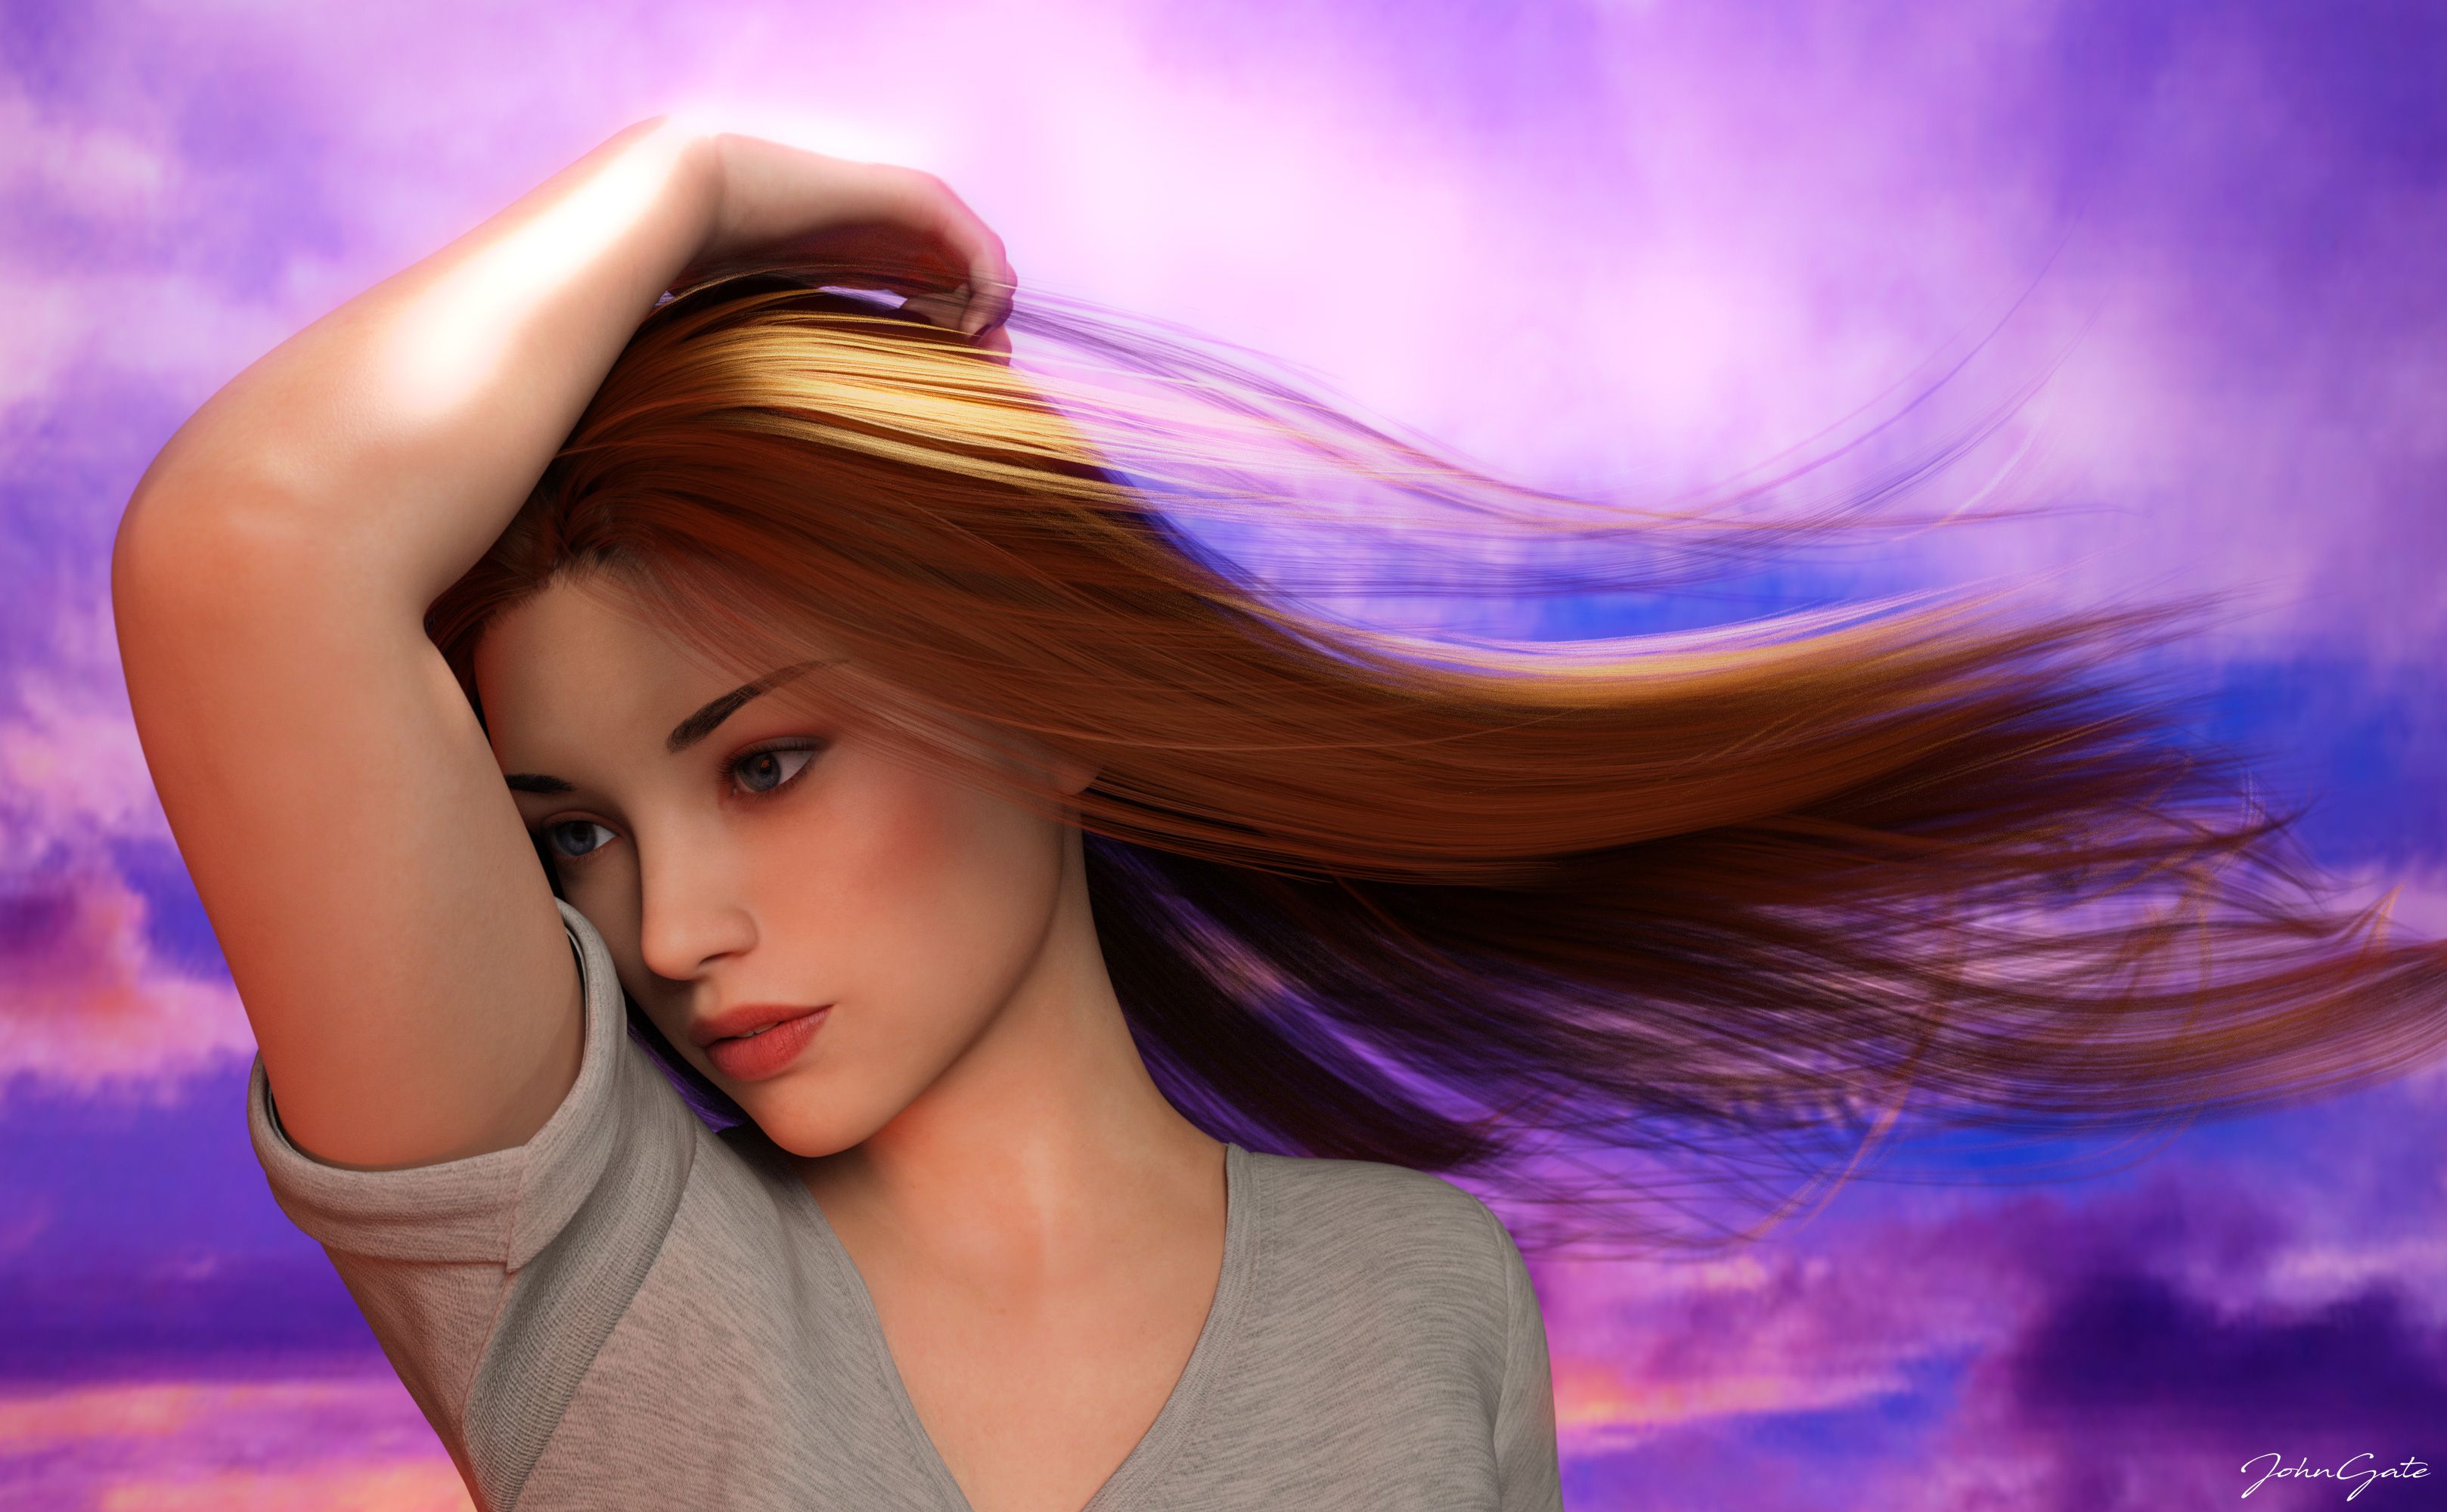 Brown Hair Girl Digital Art, HD Fantasy Girls, 4k Wallpaper, Image, Background, Photo and Picture